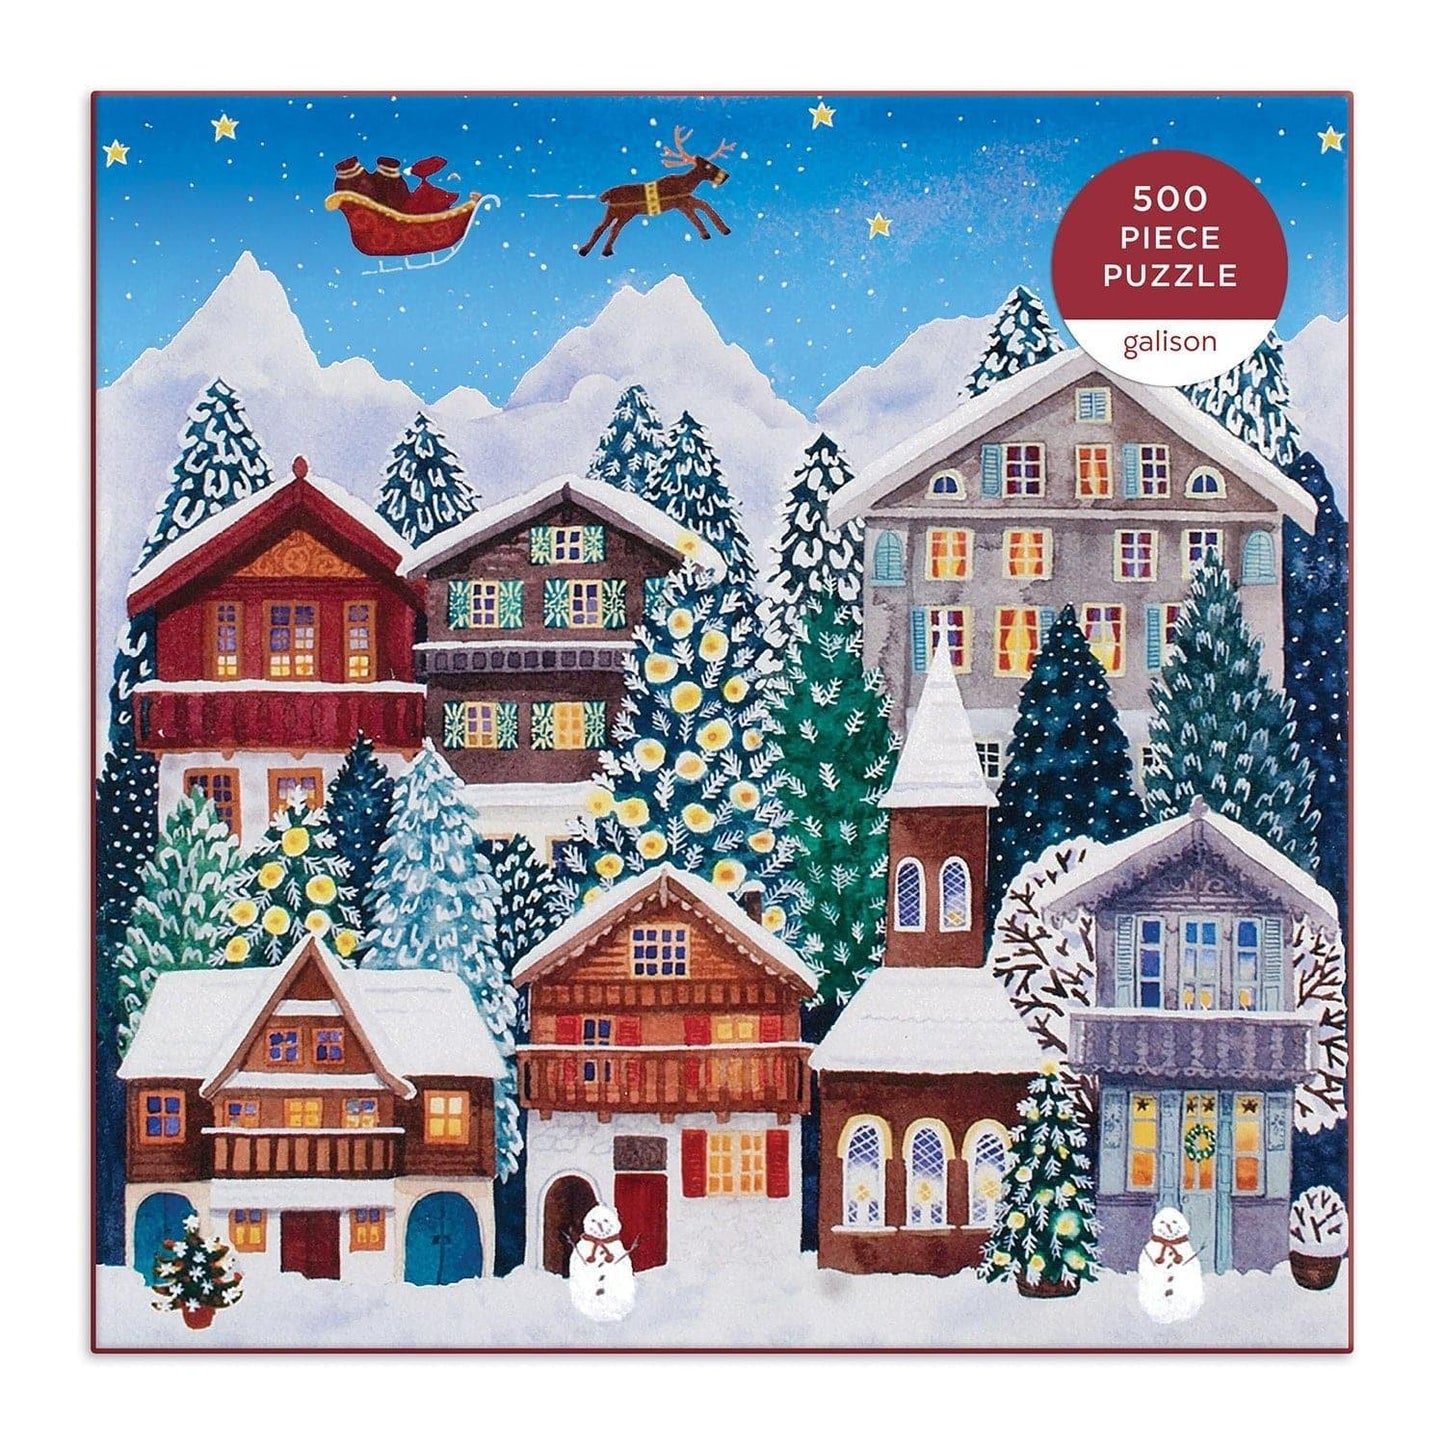 Yuletide Village 500 Piece Jigsaw Puzzle - MAIA HOMES